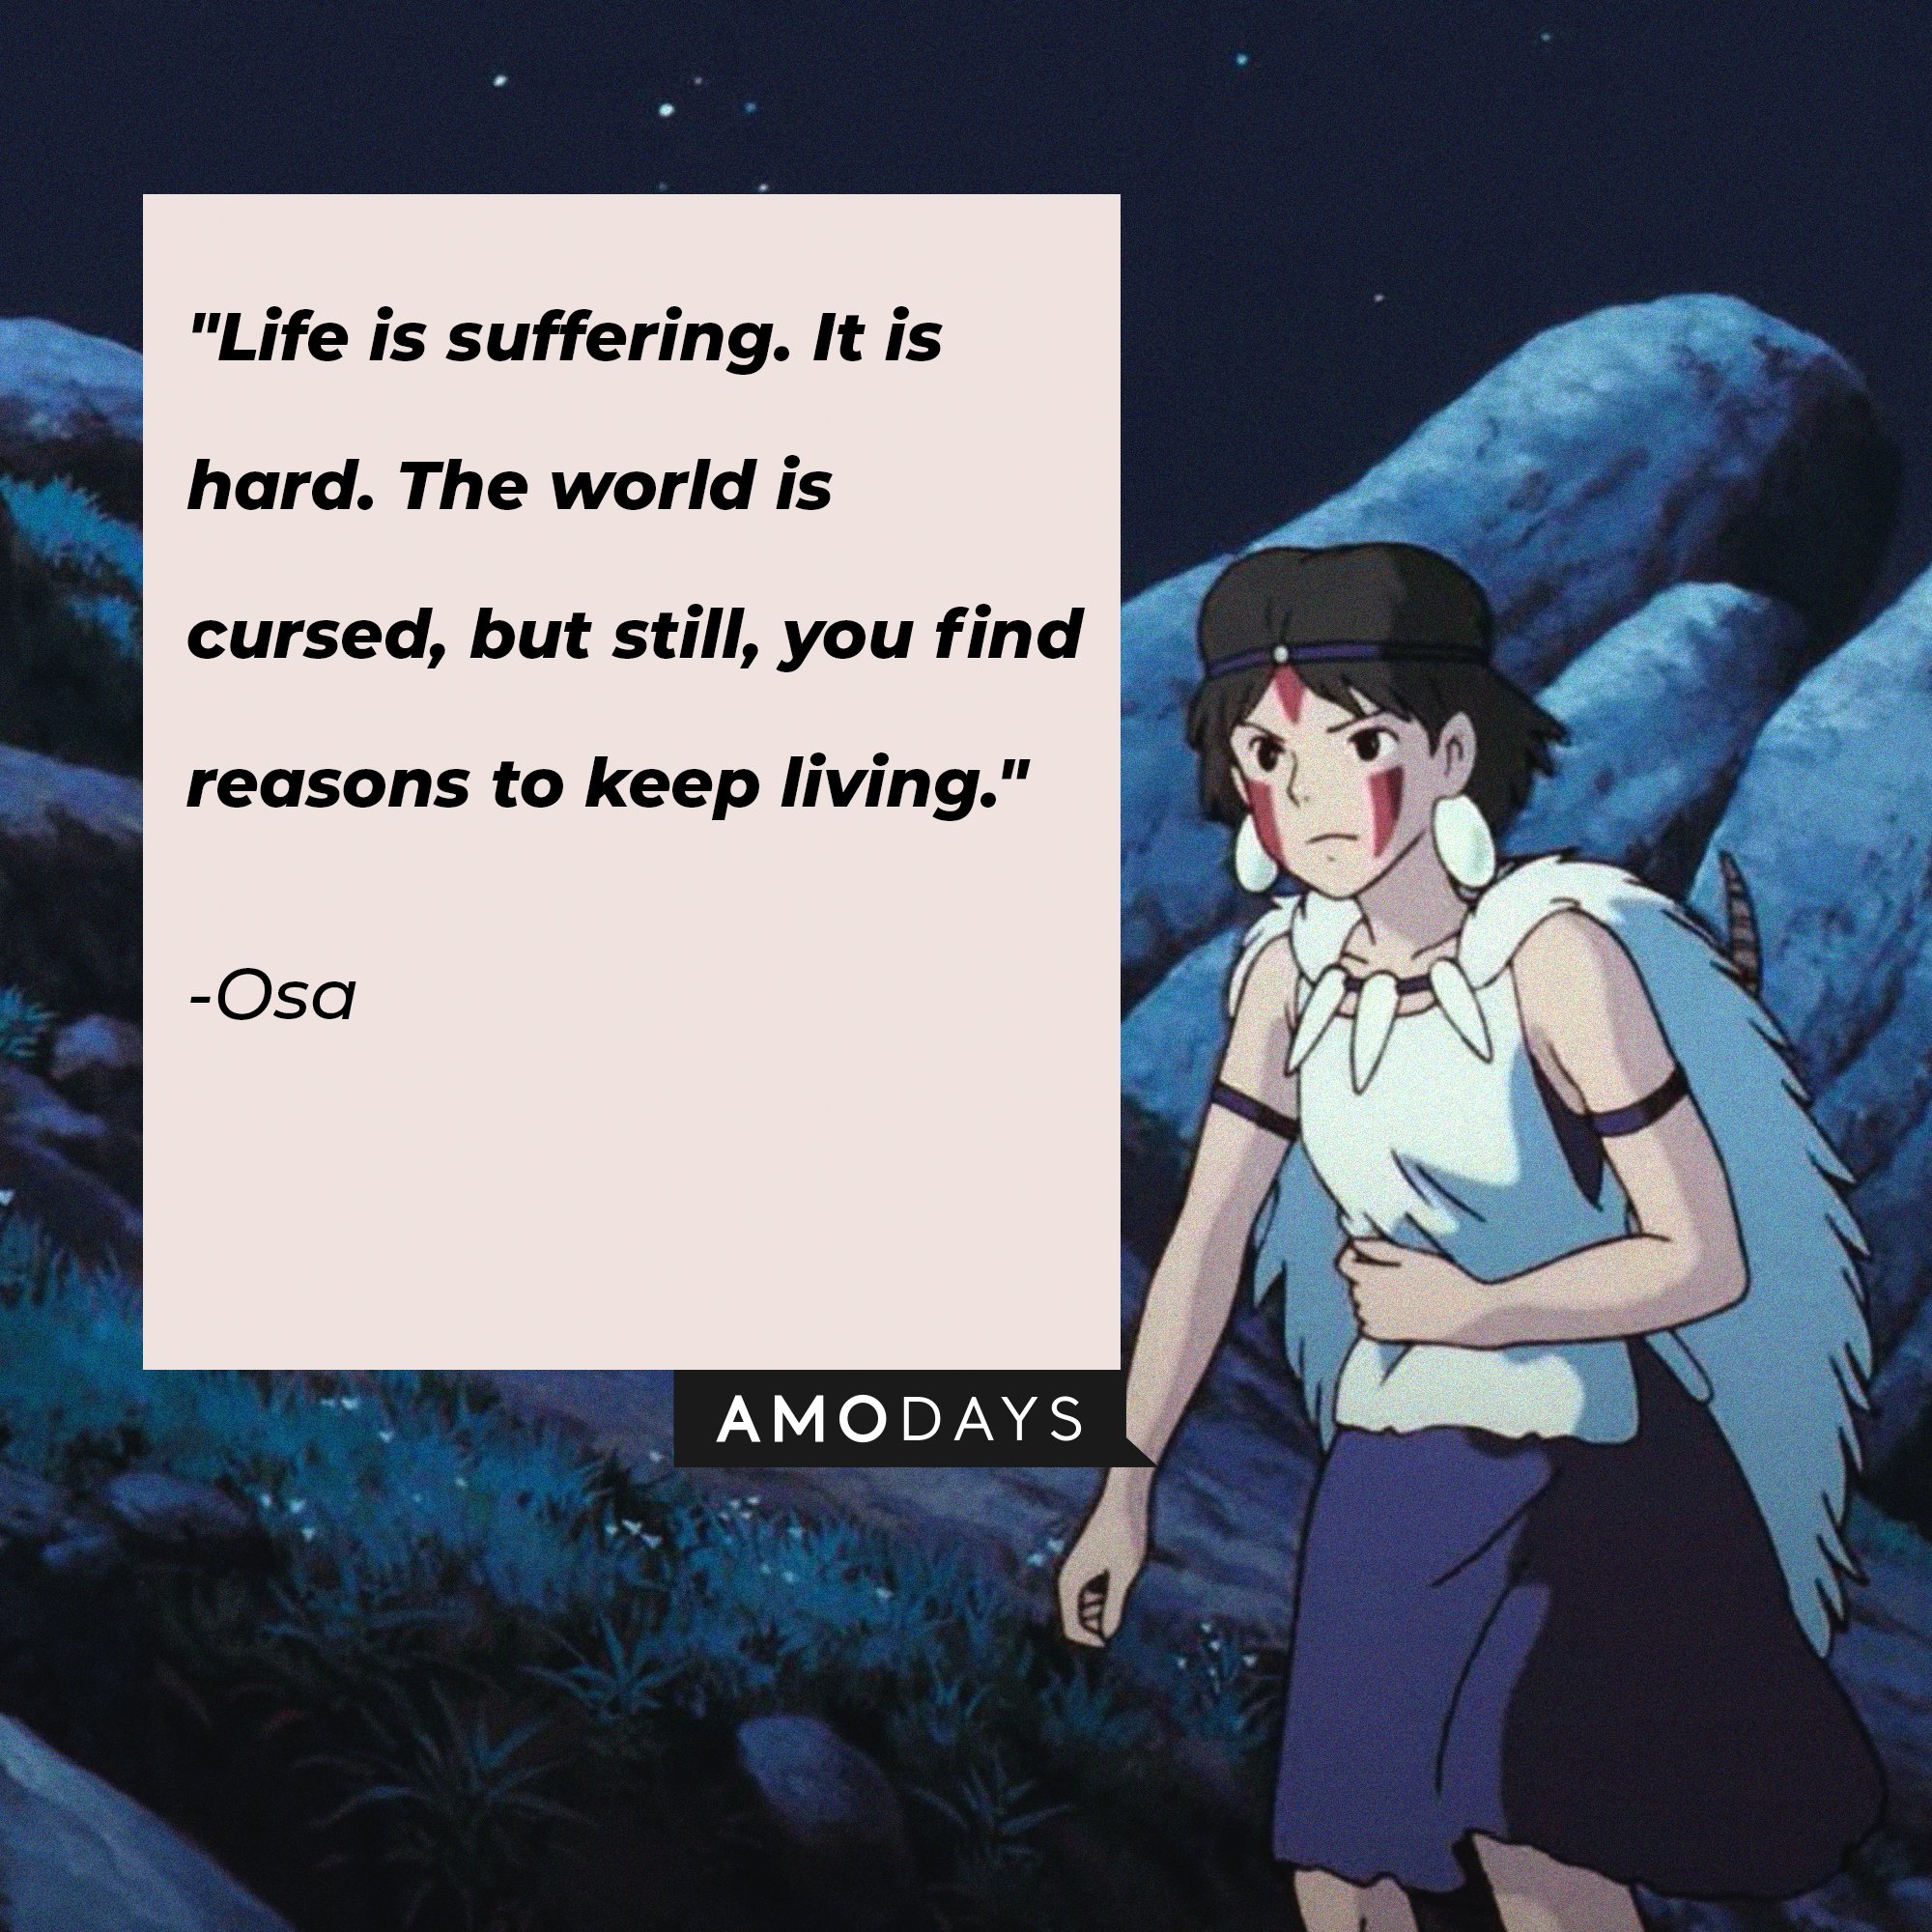 Osa’s quote: "Life is suffering. It is hard. The world is cursed, but still, you find reasons to keep living." | Image: AmoDays